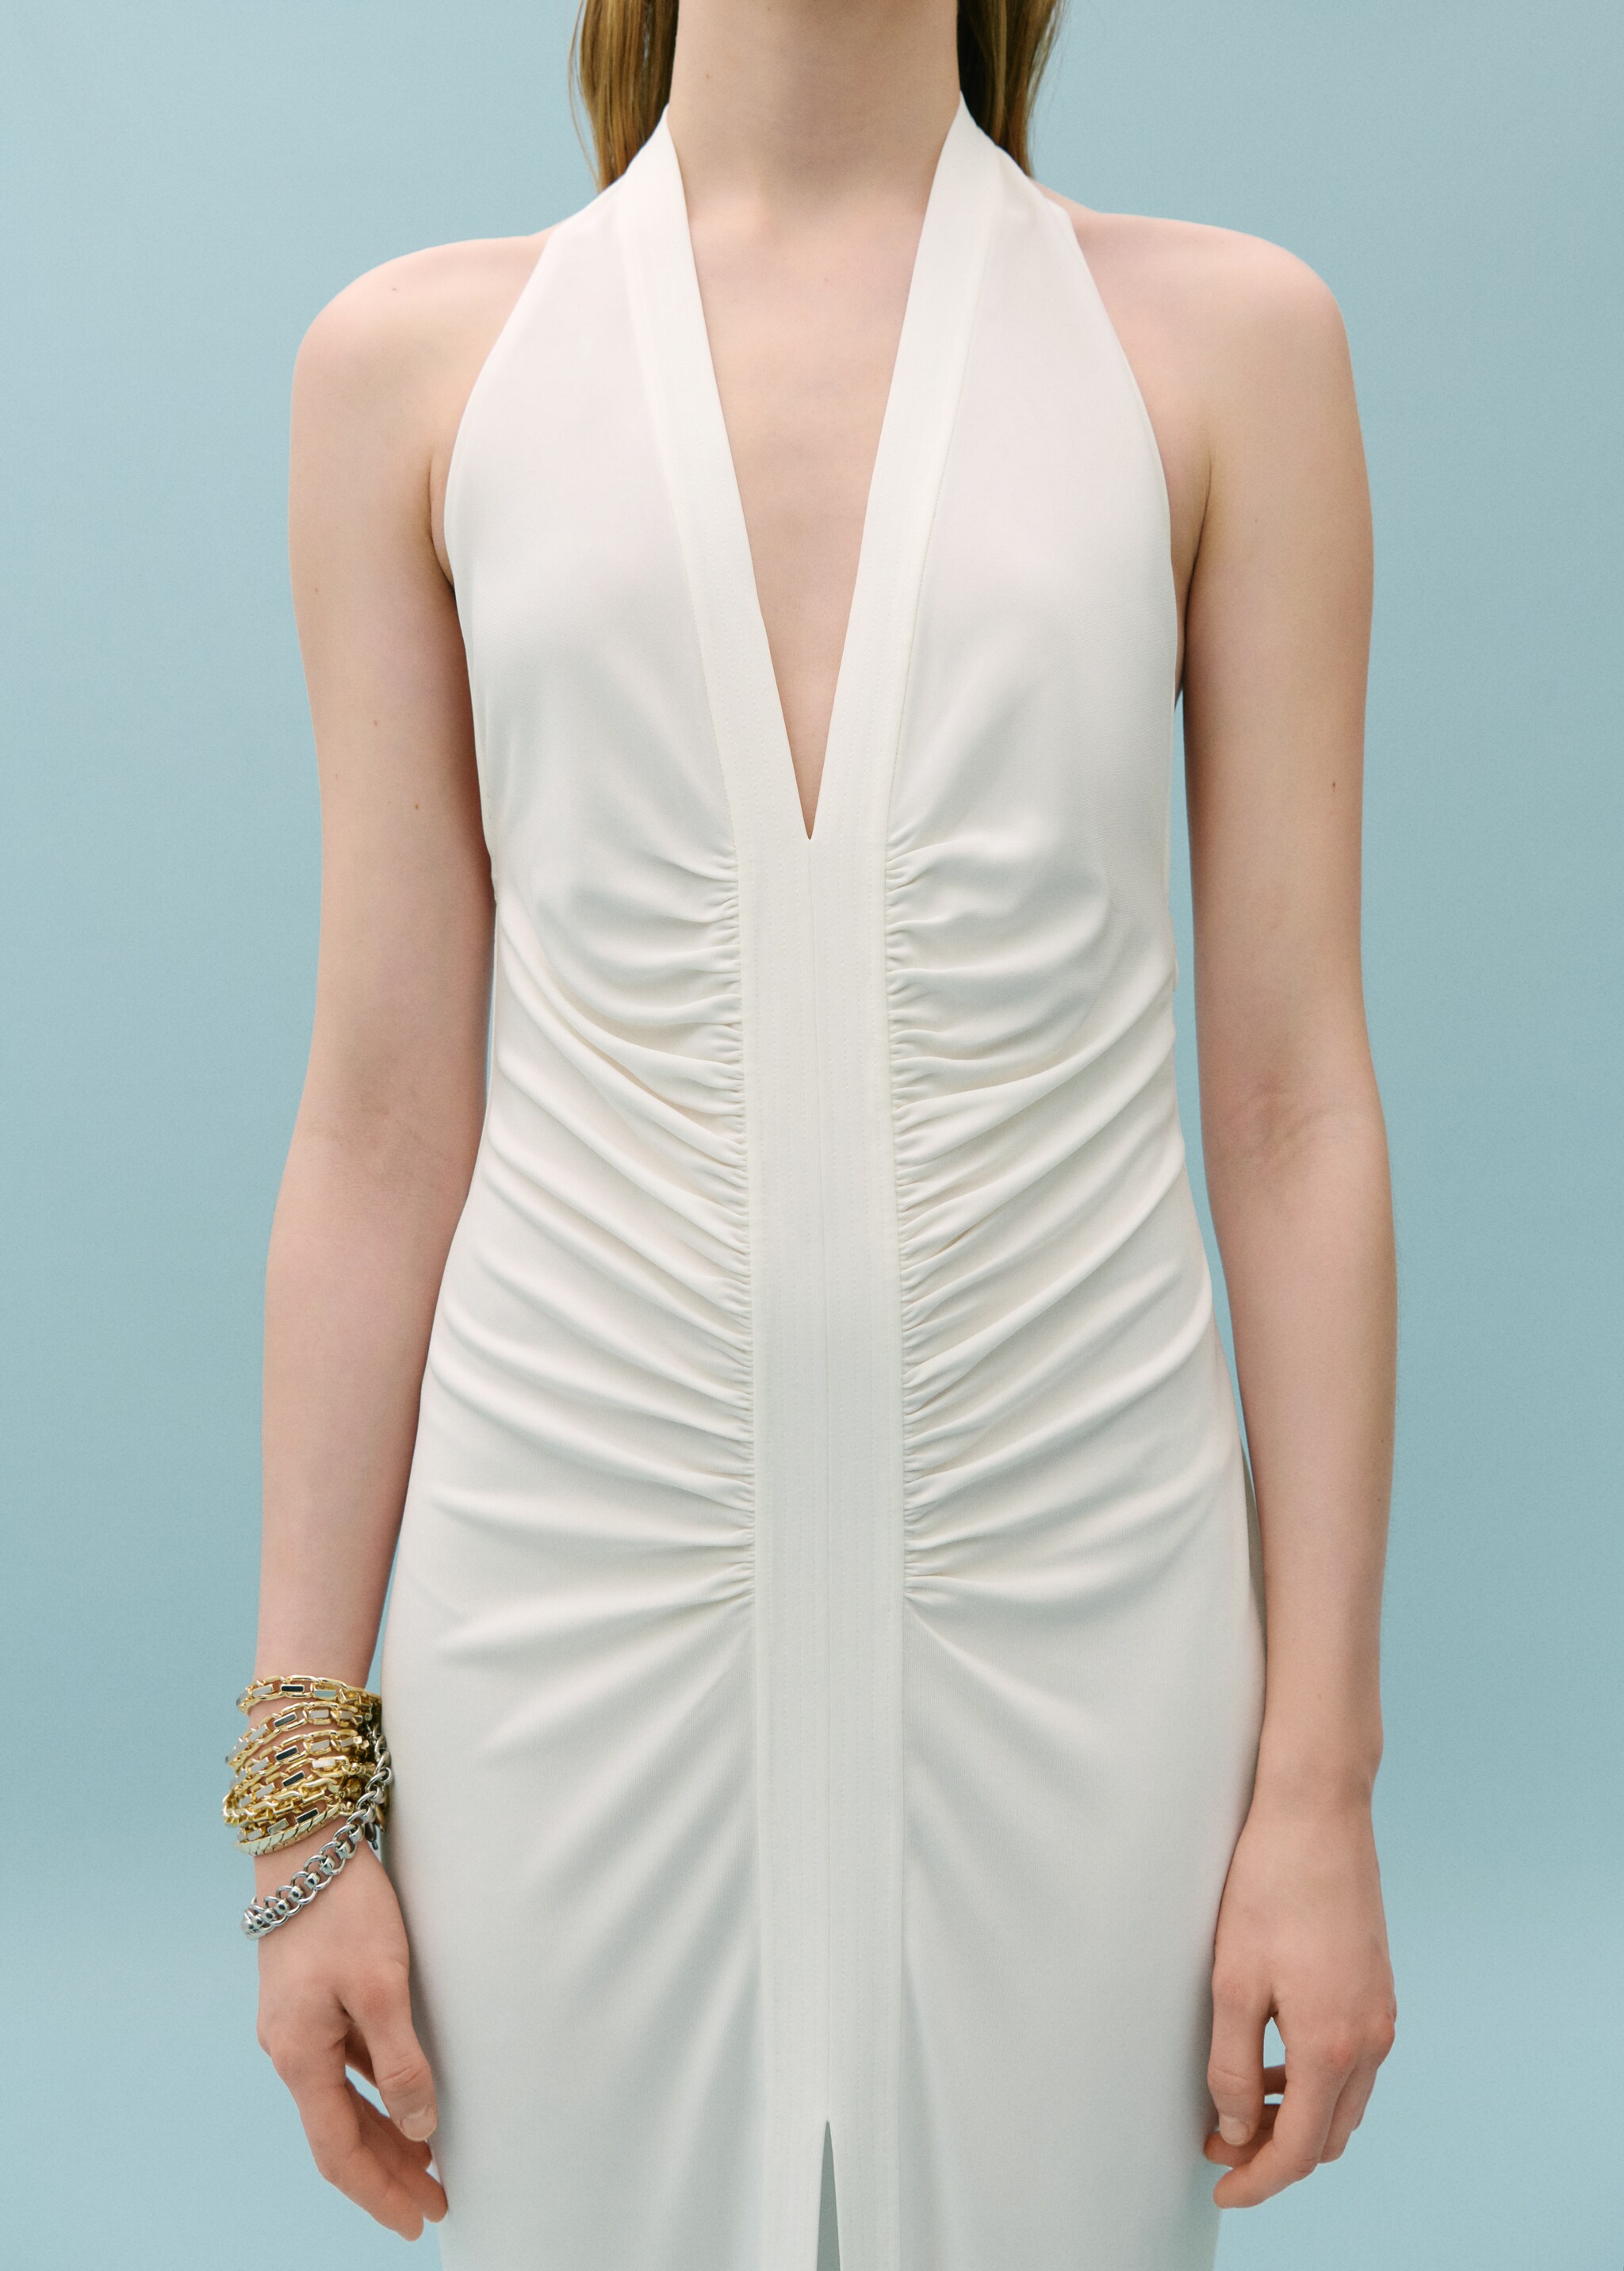 Draped halter dress with opening - Details of the article 6